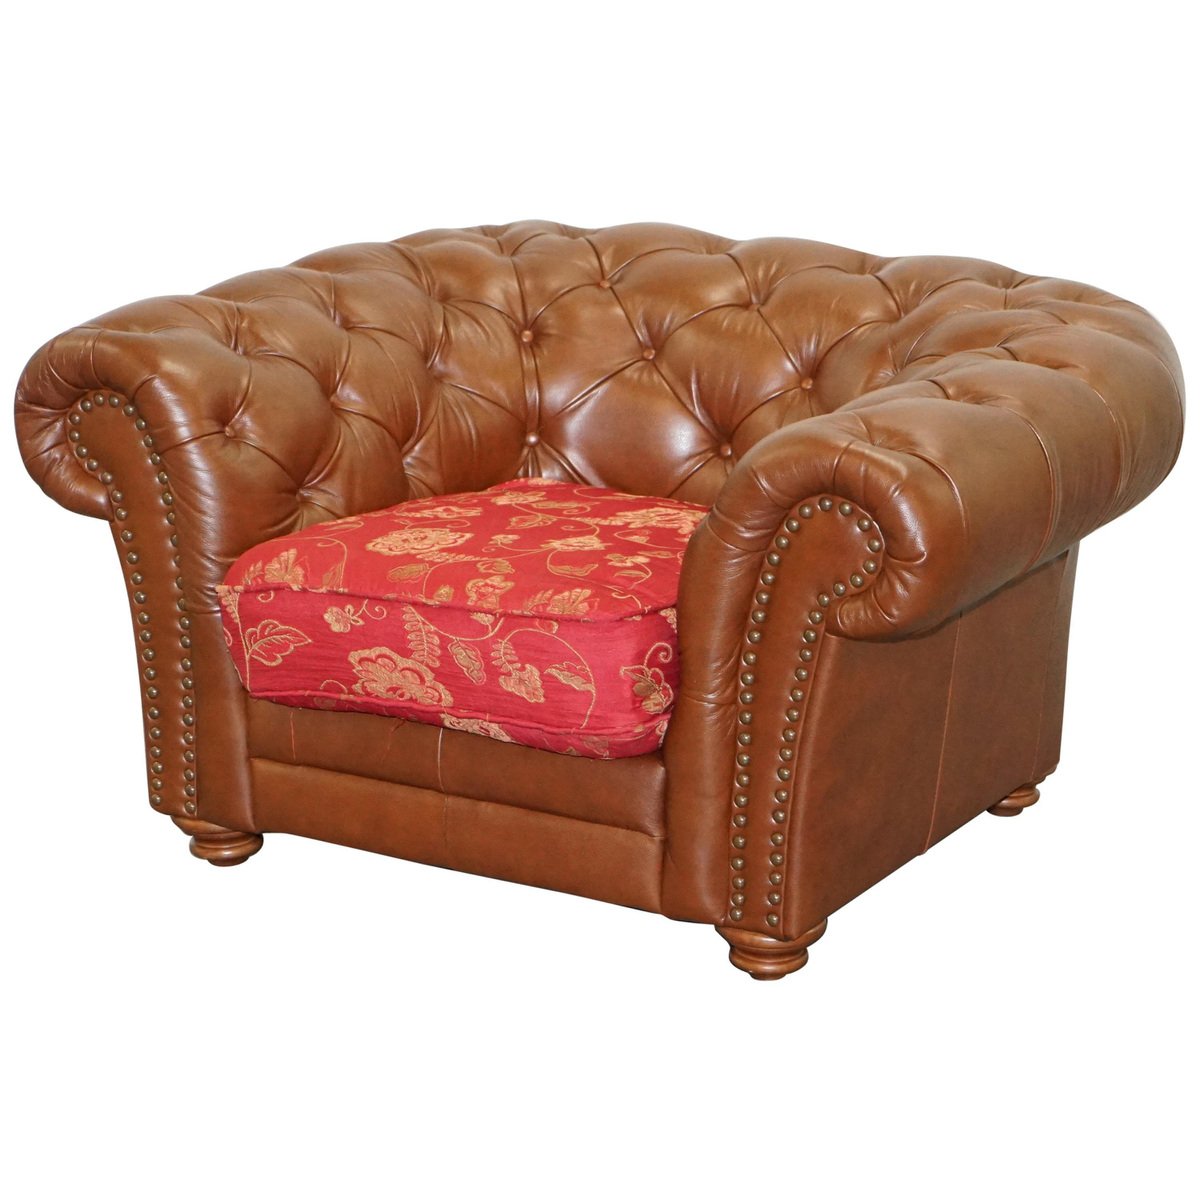 brown leather chesterfield armchair 1 GZP-1006787